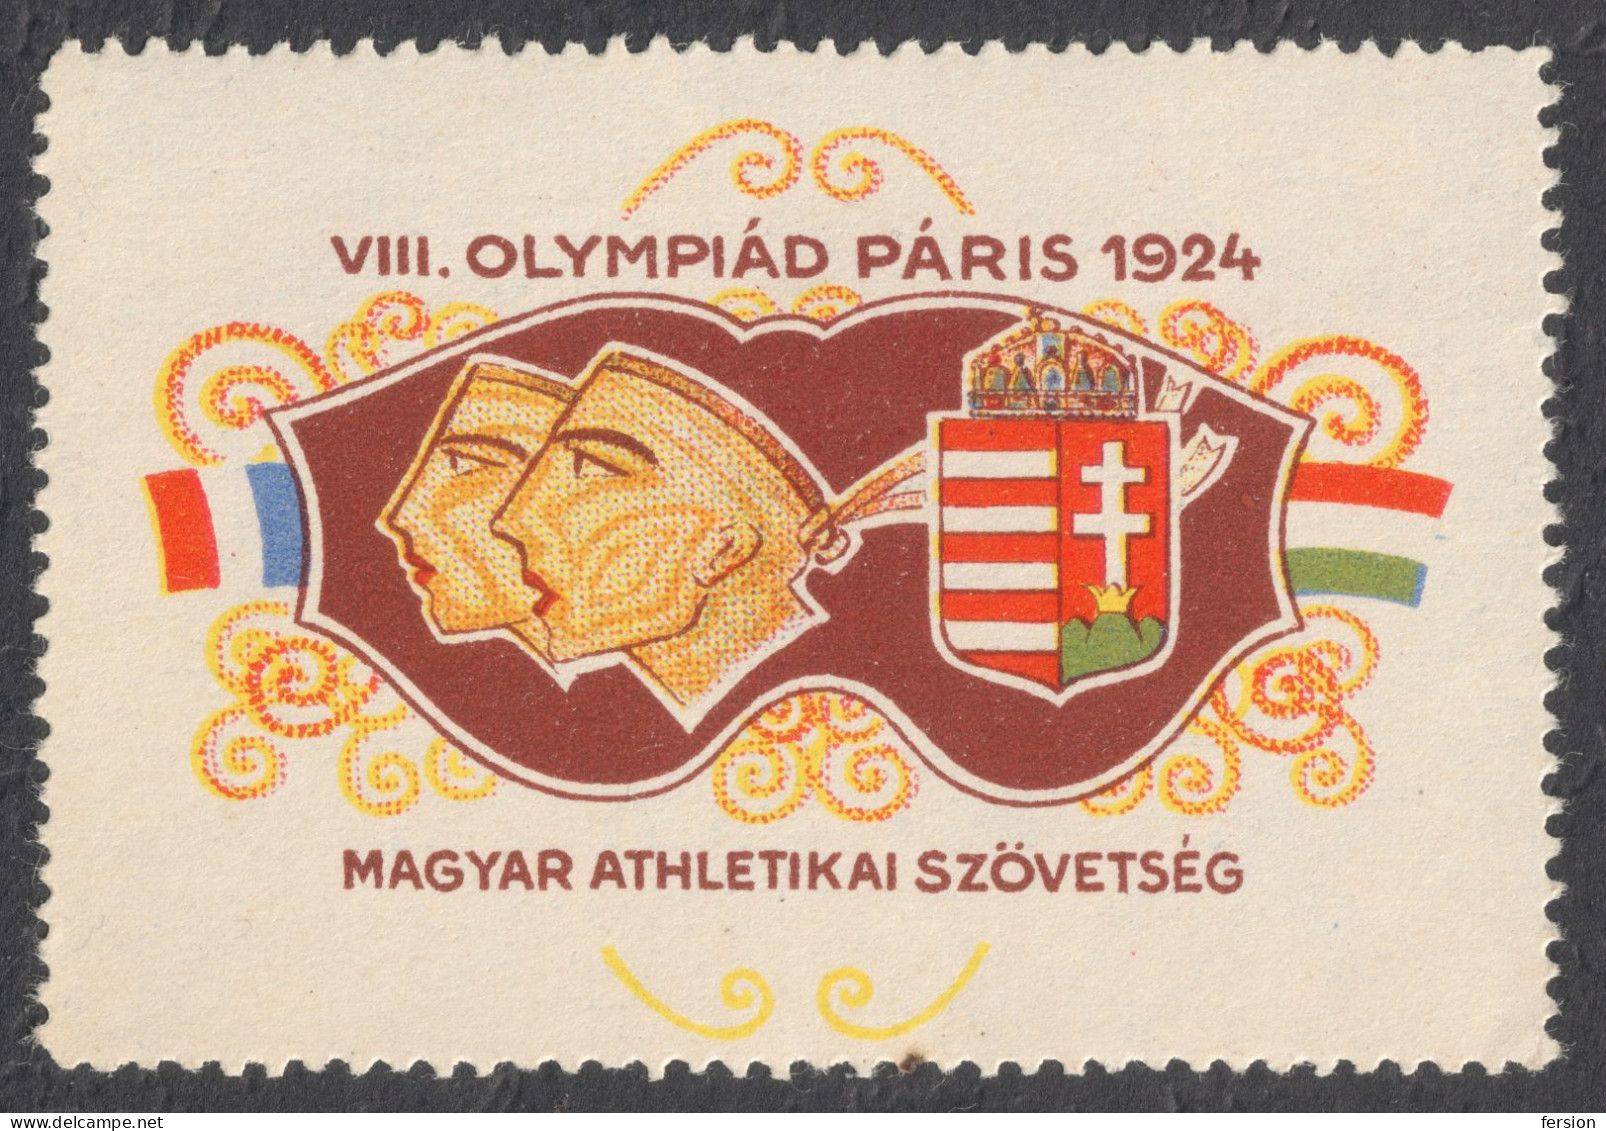 Paris 1924 Olympics Olympic GAMES / France Hungary Athletics MH - LABEL CINDERELLA VIGNETTE FLAG / Coat Of Arms - Sommer 1924: Paris